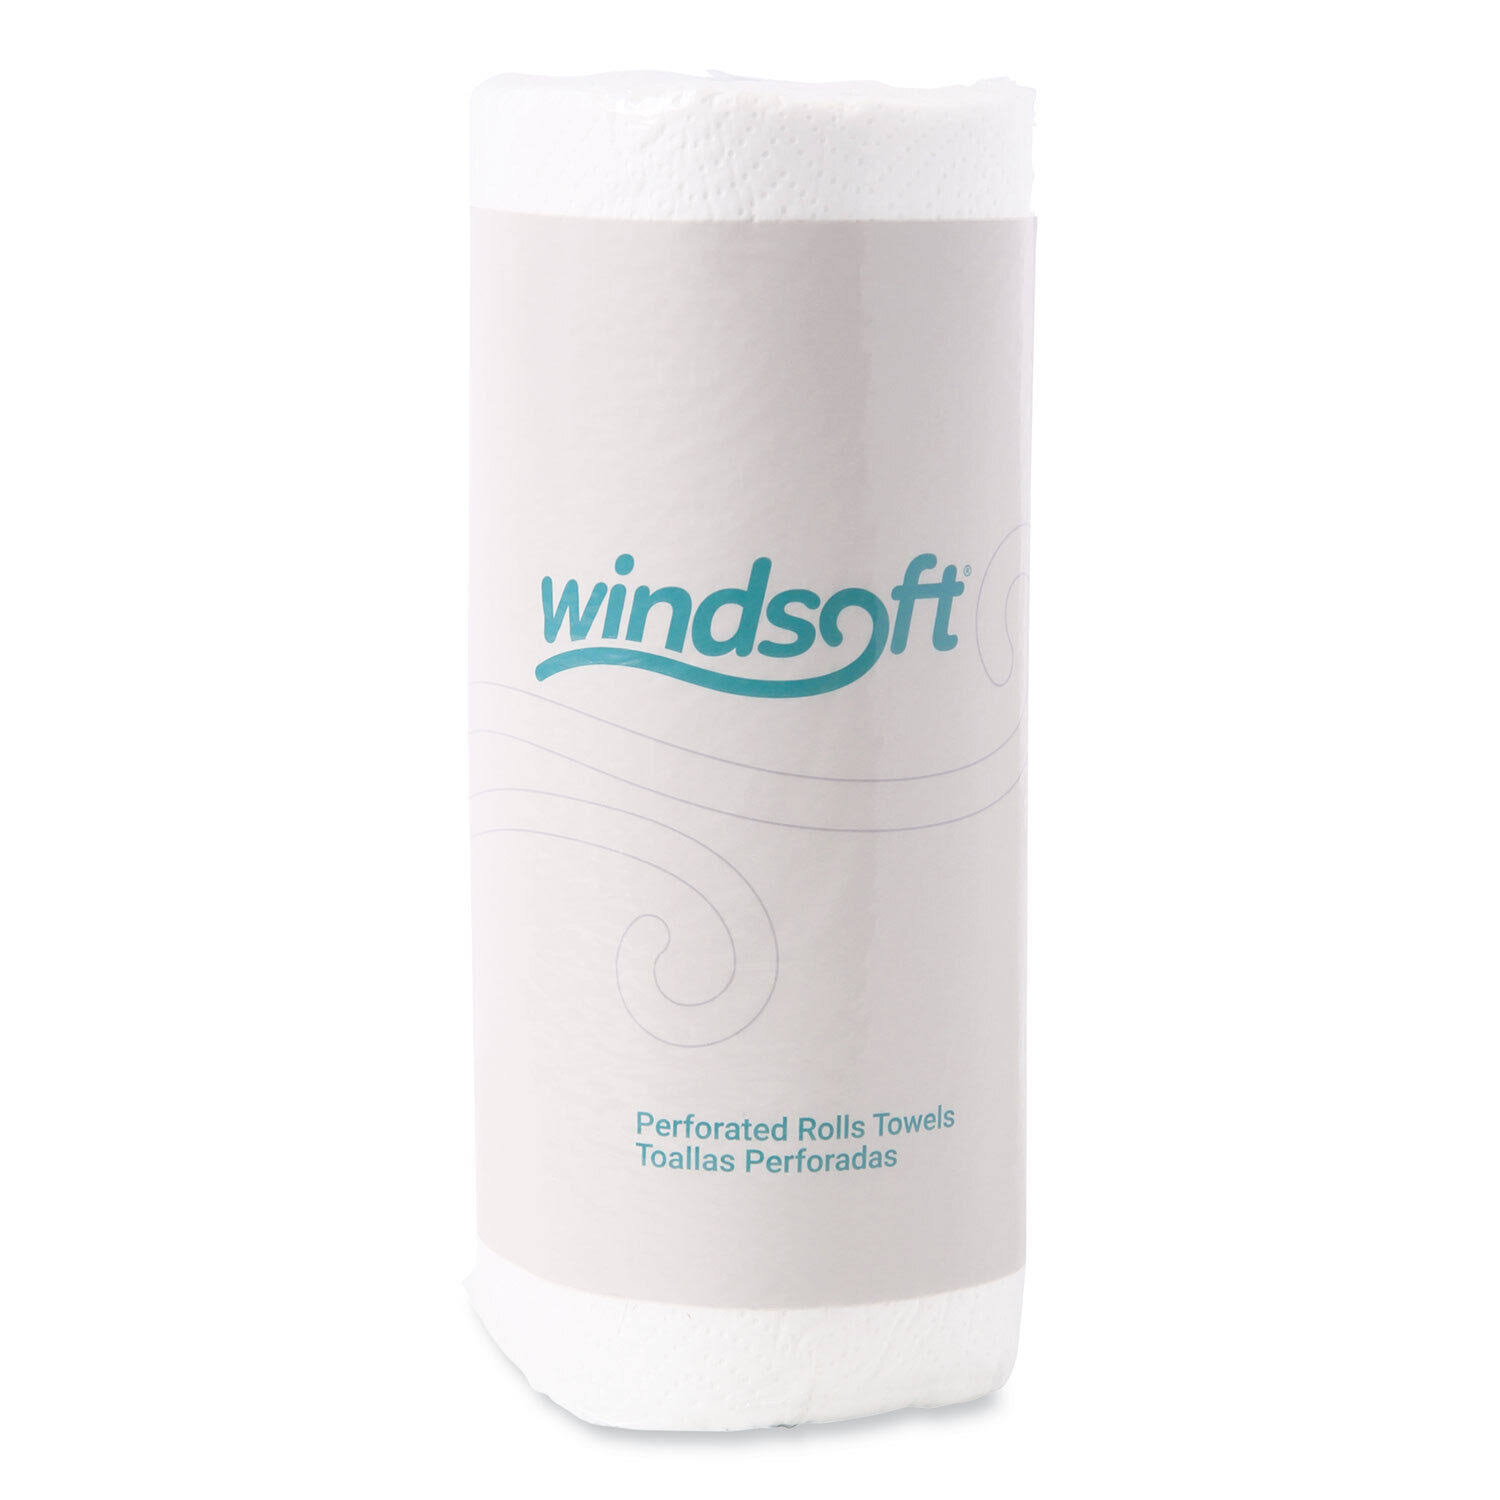 Windsoft Paper Towels - 100 Sheets, Set of 4, 2 Ply